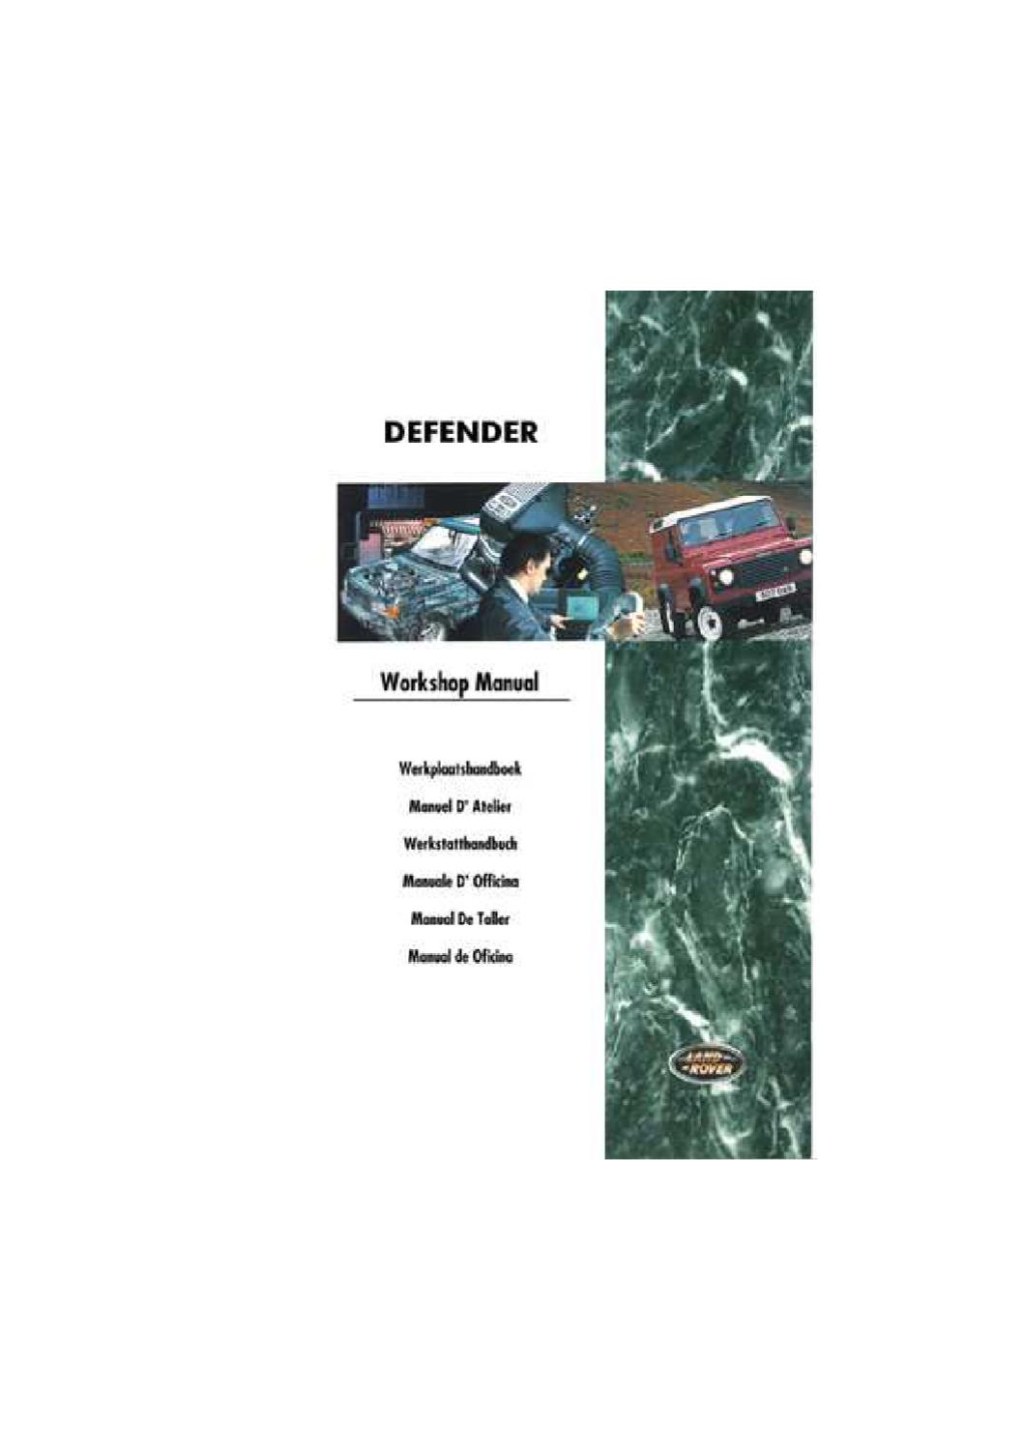 Picture of: Defender Workshop Manual by Allan Green – Issuu